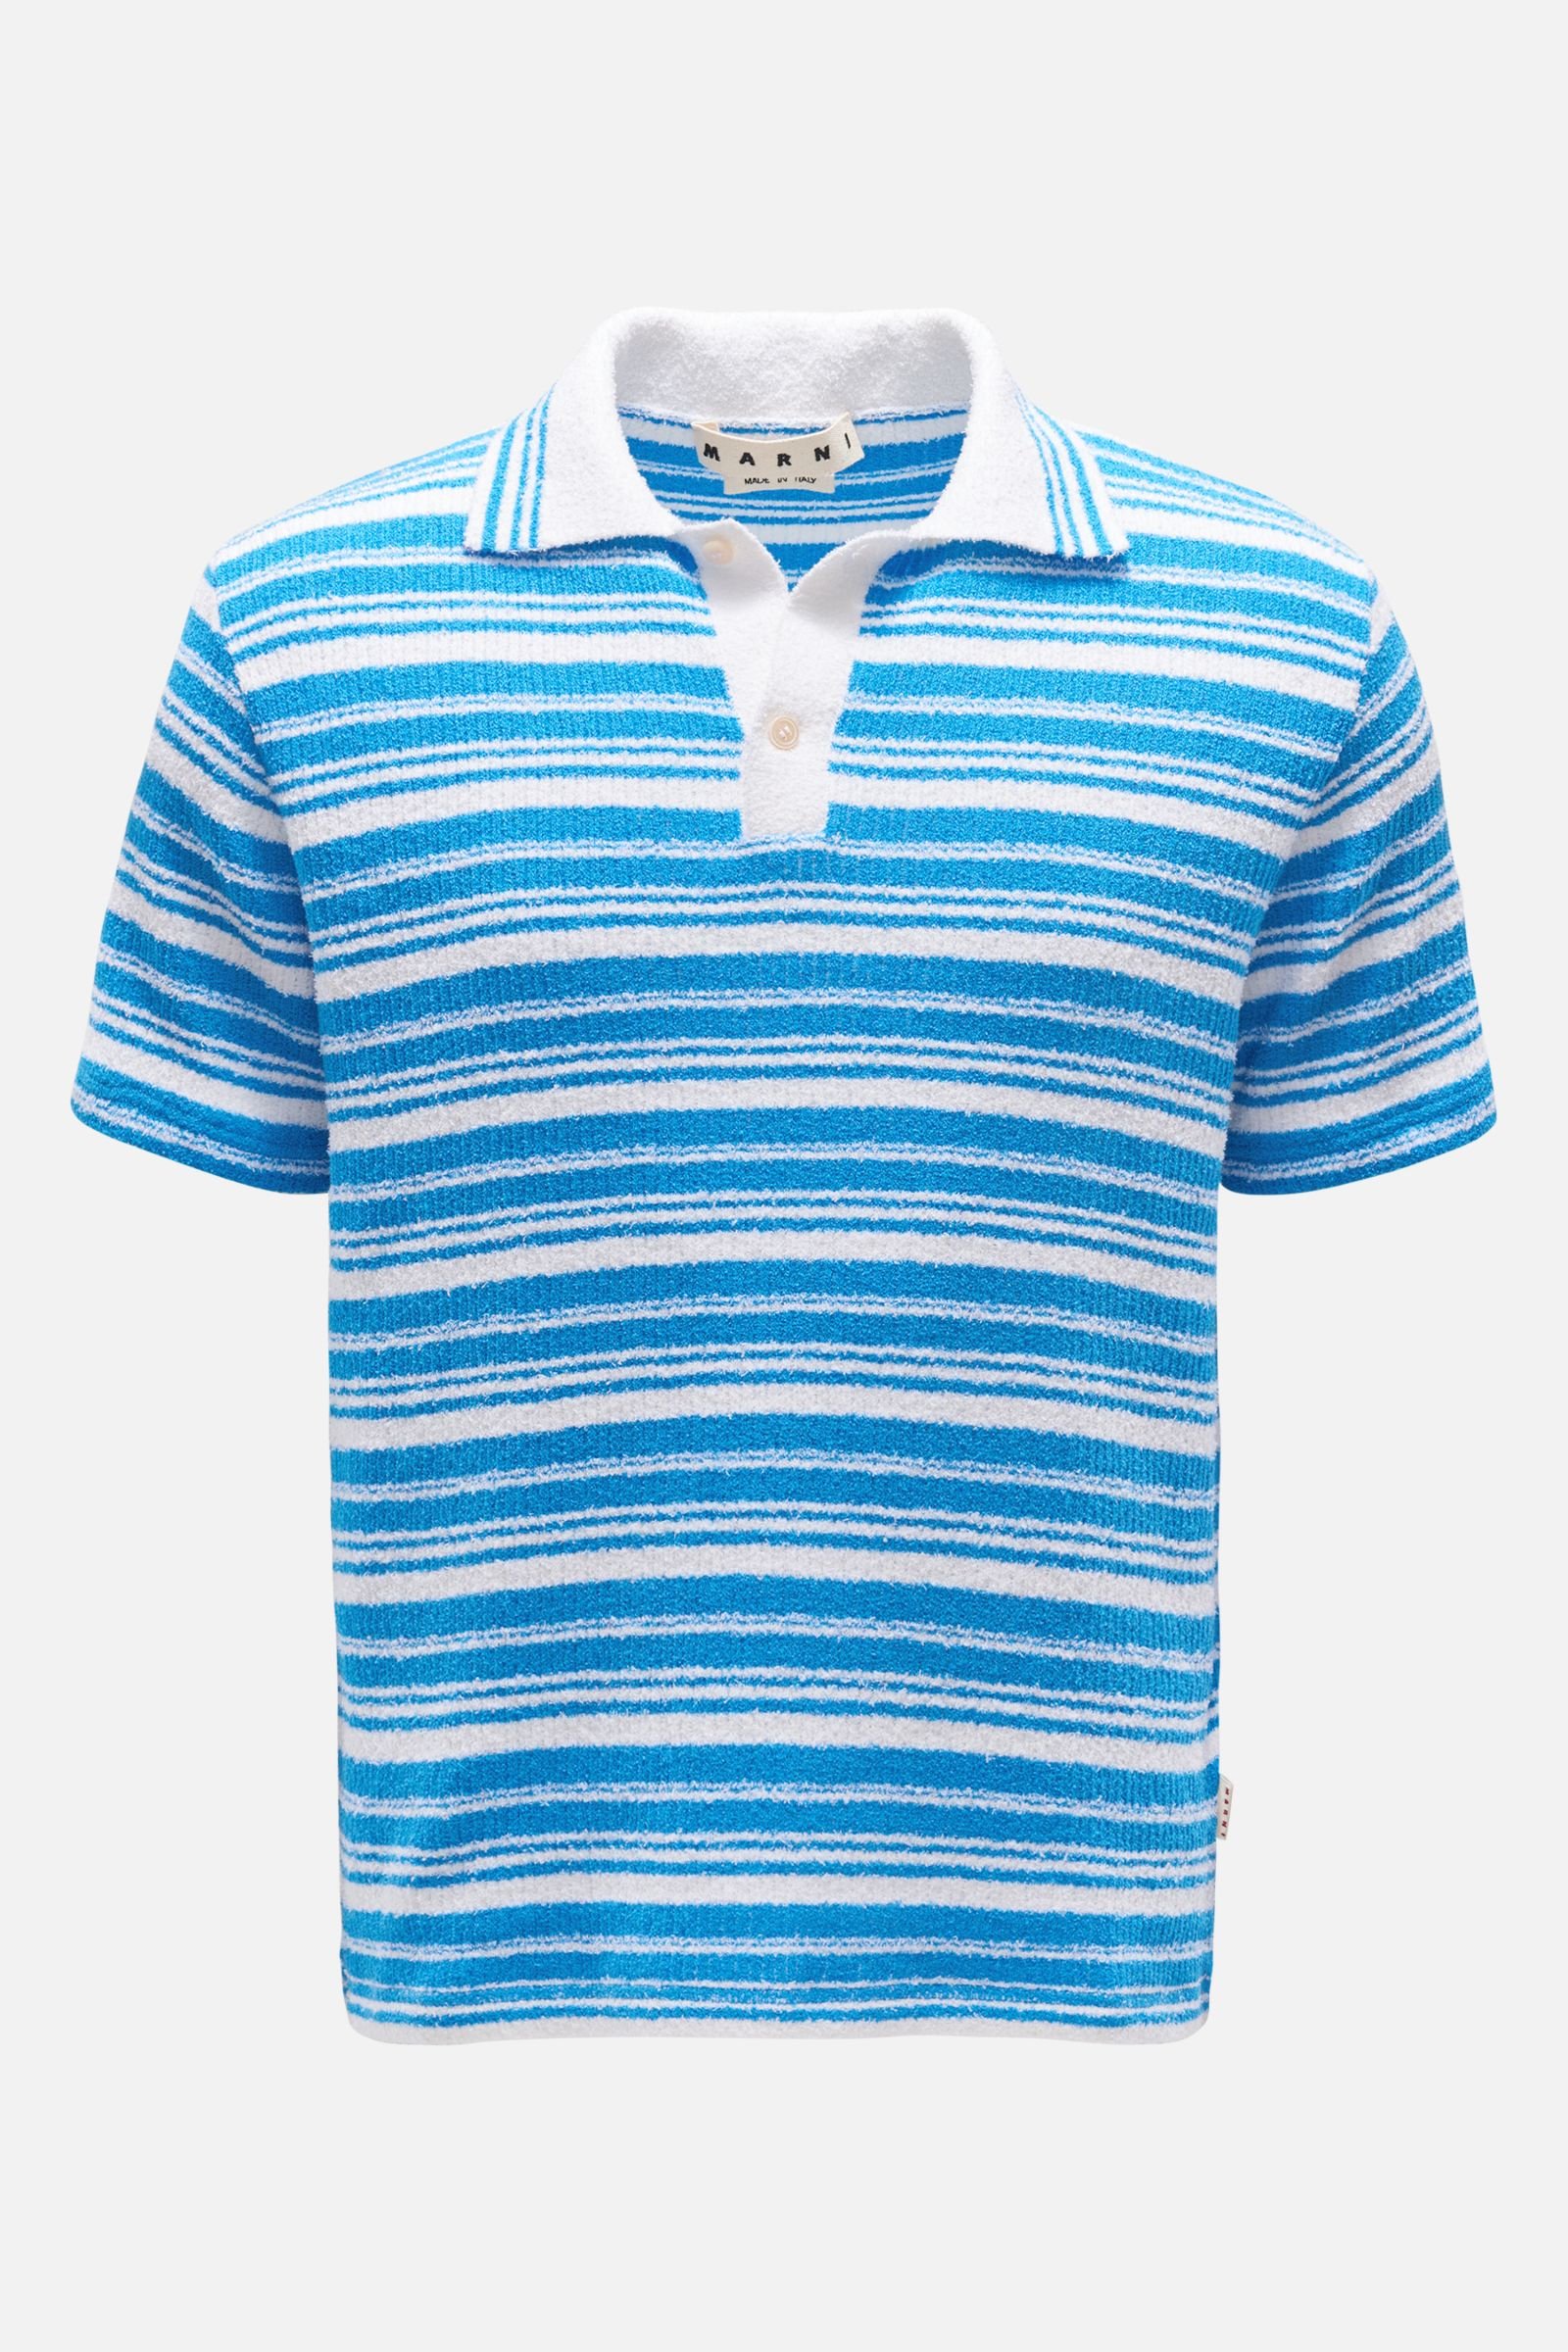 Short sleeve knit polo blue/white striped